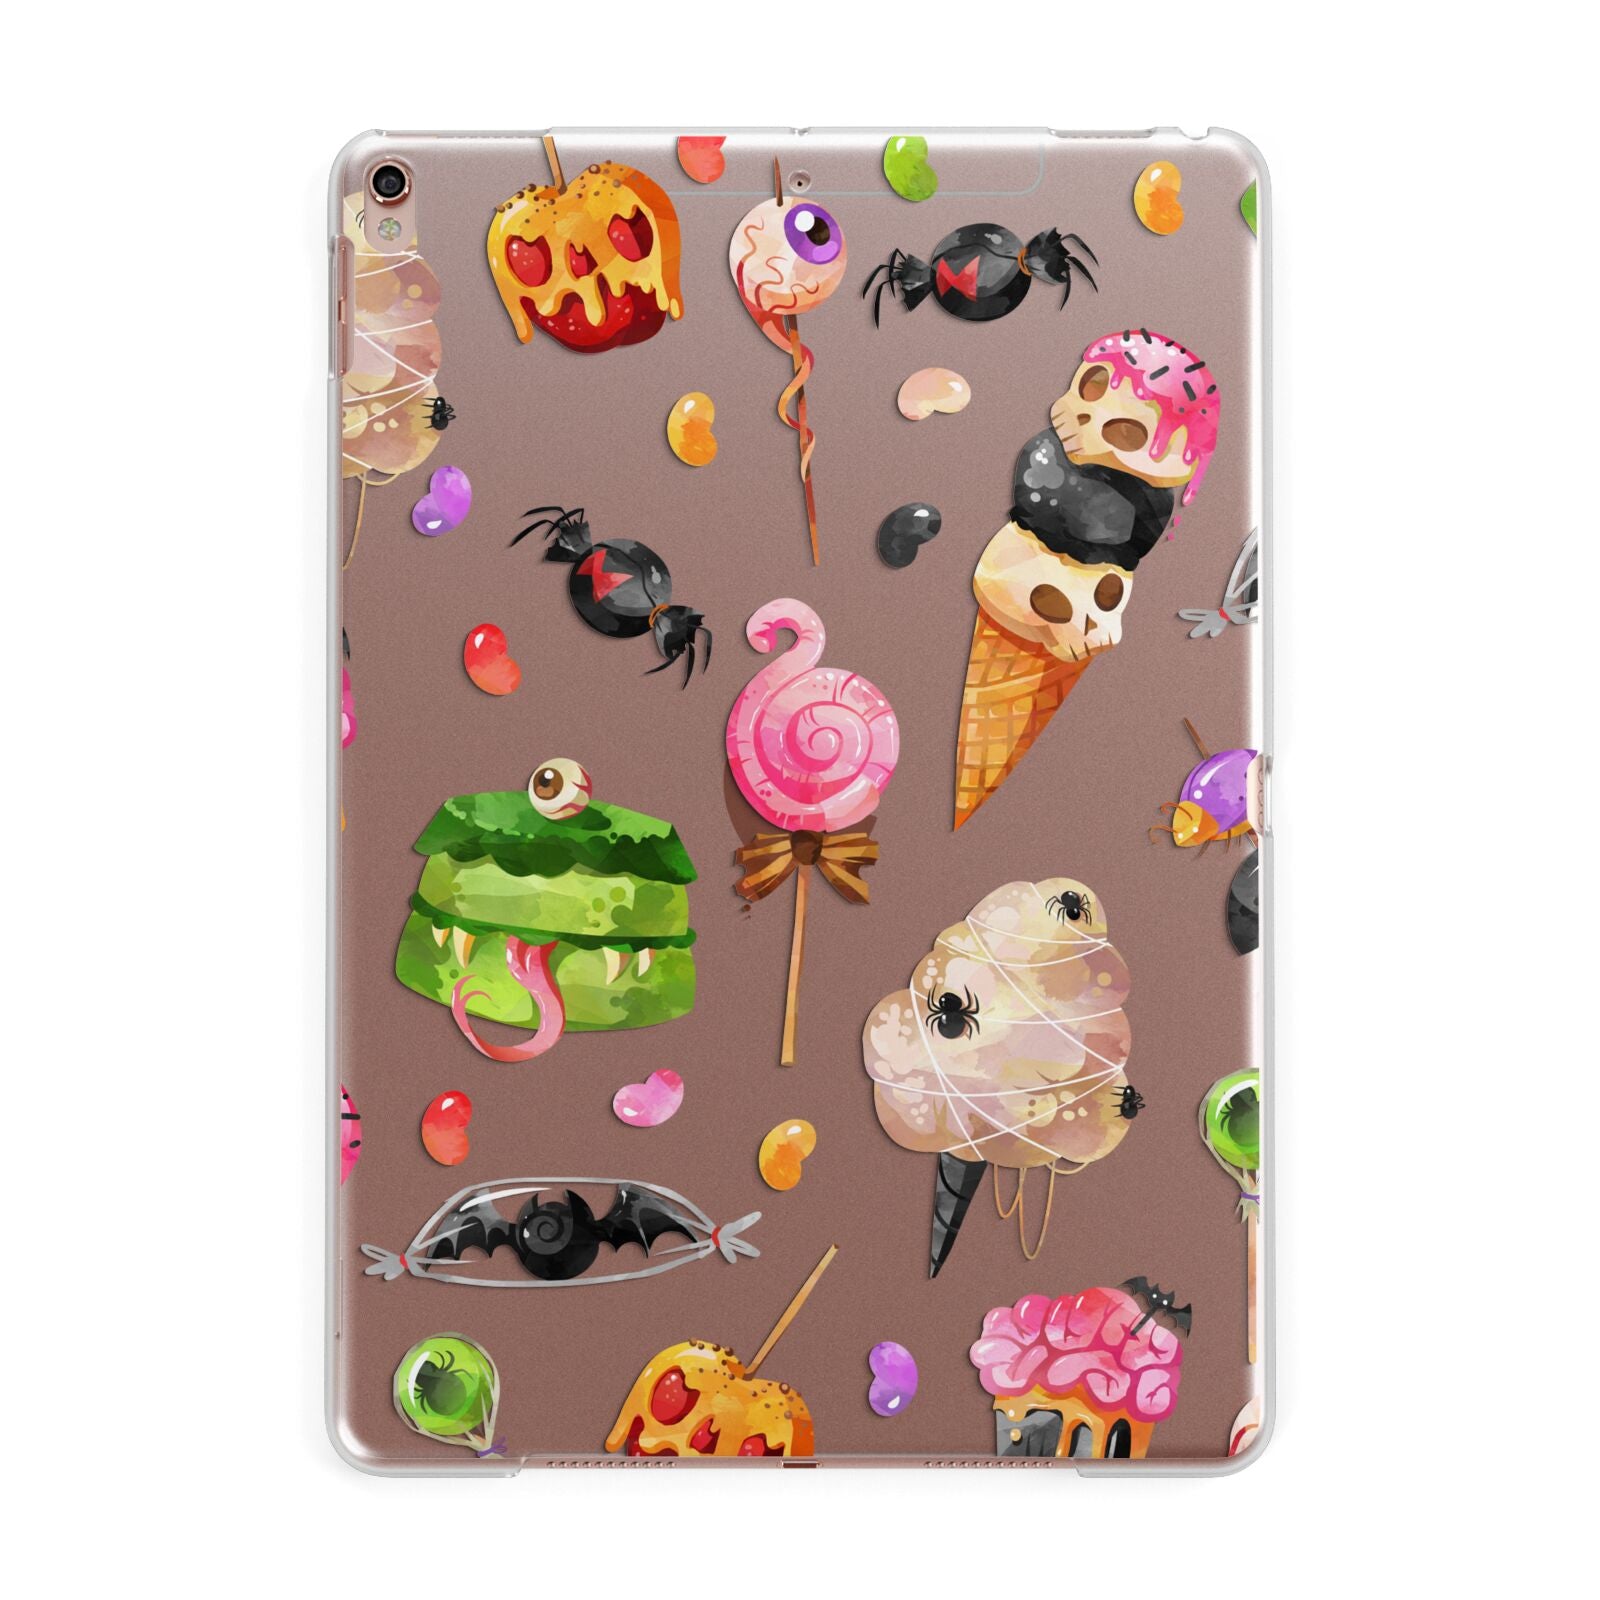 Halloween Cakes and Candy Apple iPad Rose Gold Case